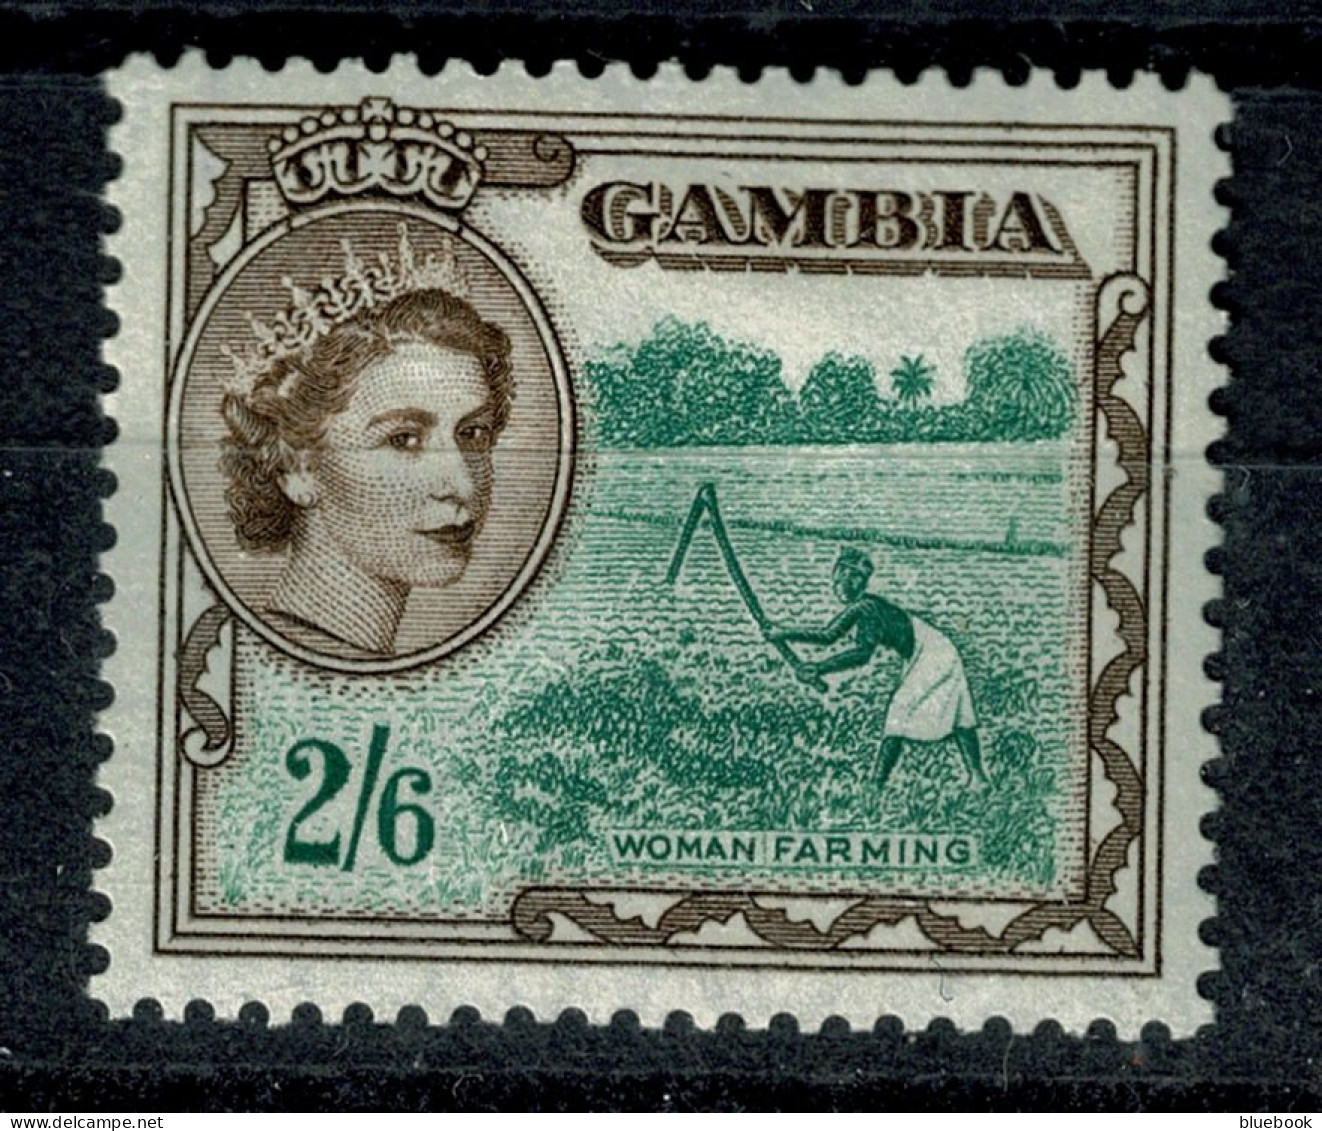 Ref 1640 - Gambia 1938 KGVI - 2s/6d Stamp Woman Farming - Lightly Mounted Mint SG 181 - Gambie (...-1964)